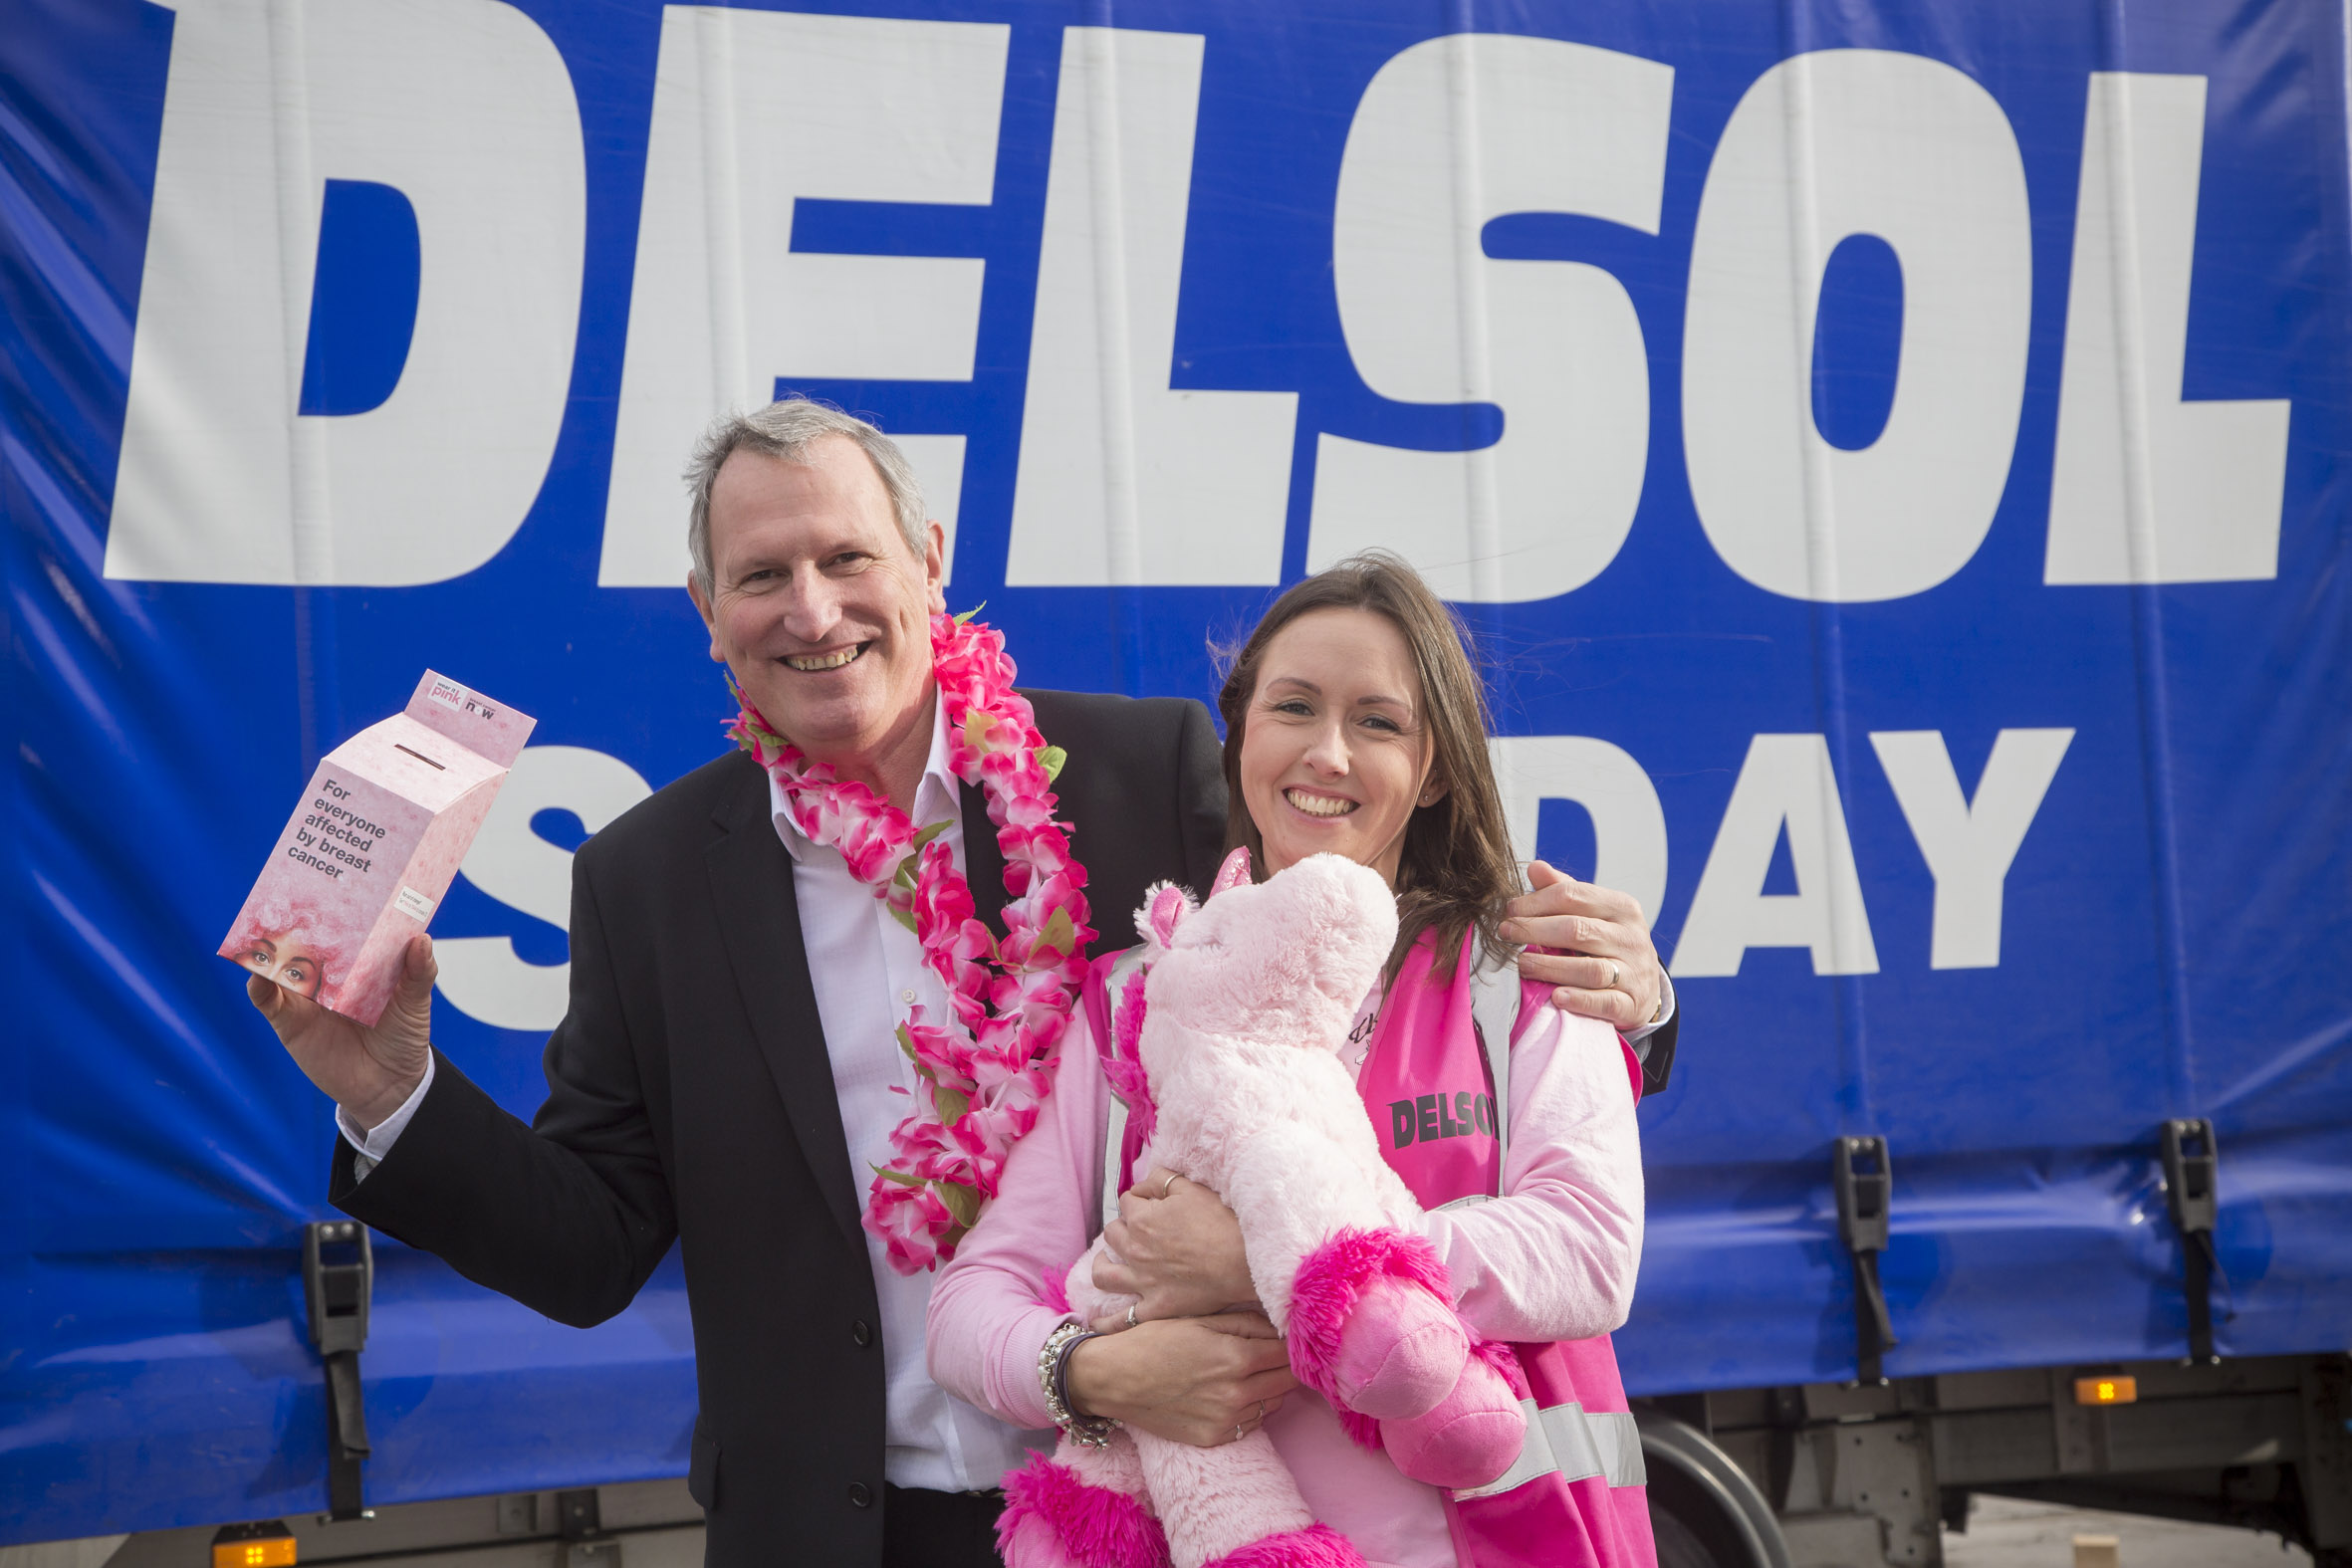 Delivery firm Delsol goes pink for charity 